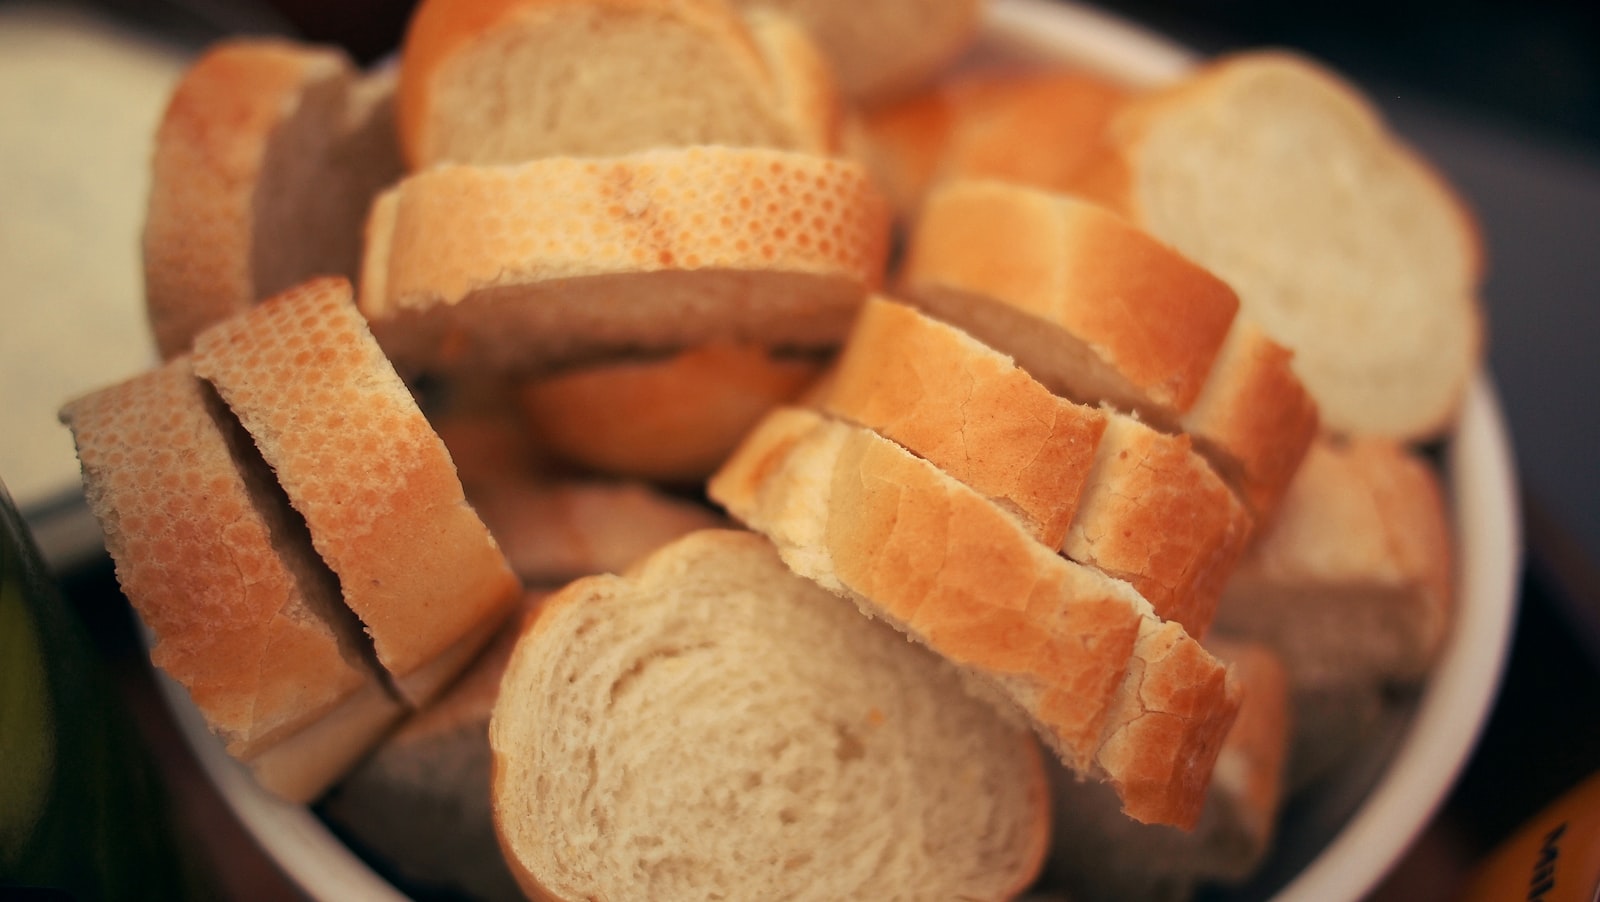 Olympus PEN E-PL1 + Panasonic Lumix G 20mm F1.7 ASPH sample photo. Loaf of bread on photography